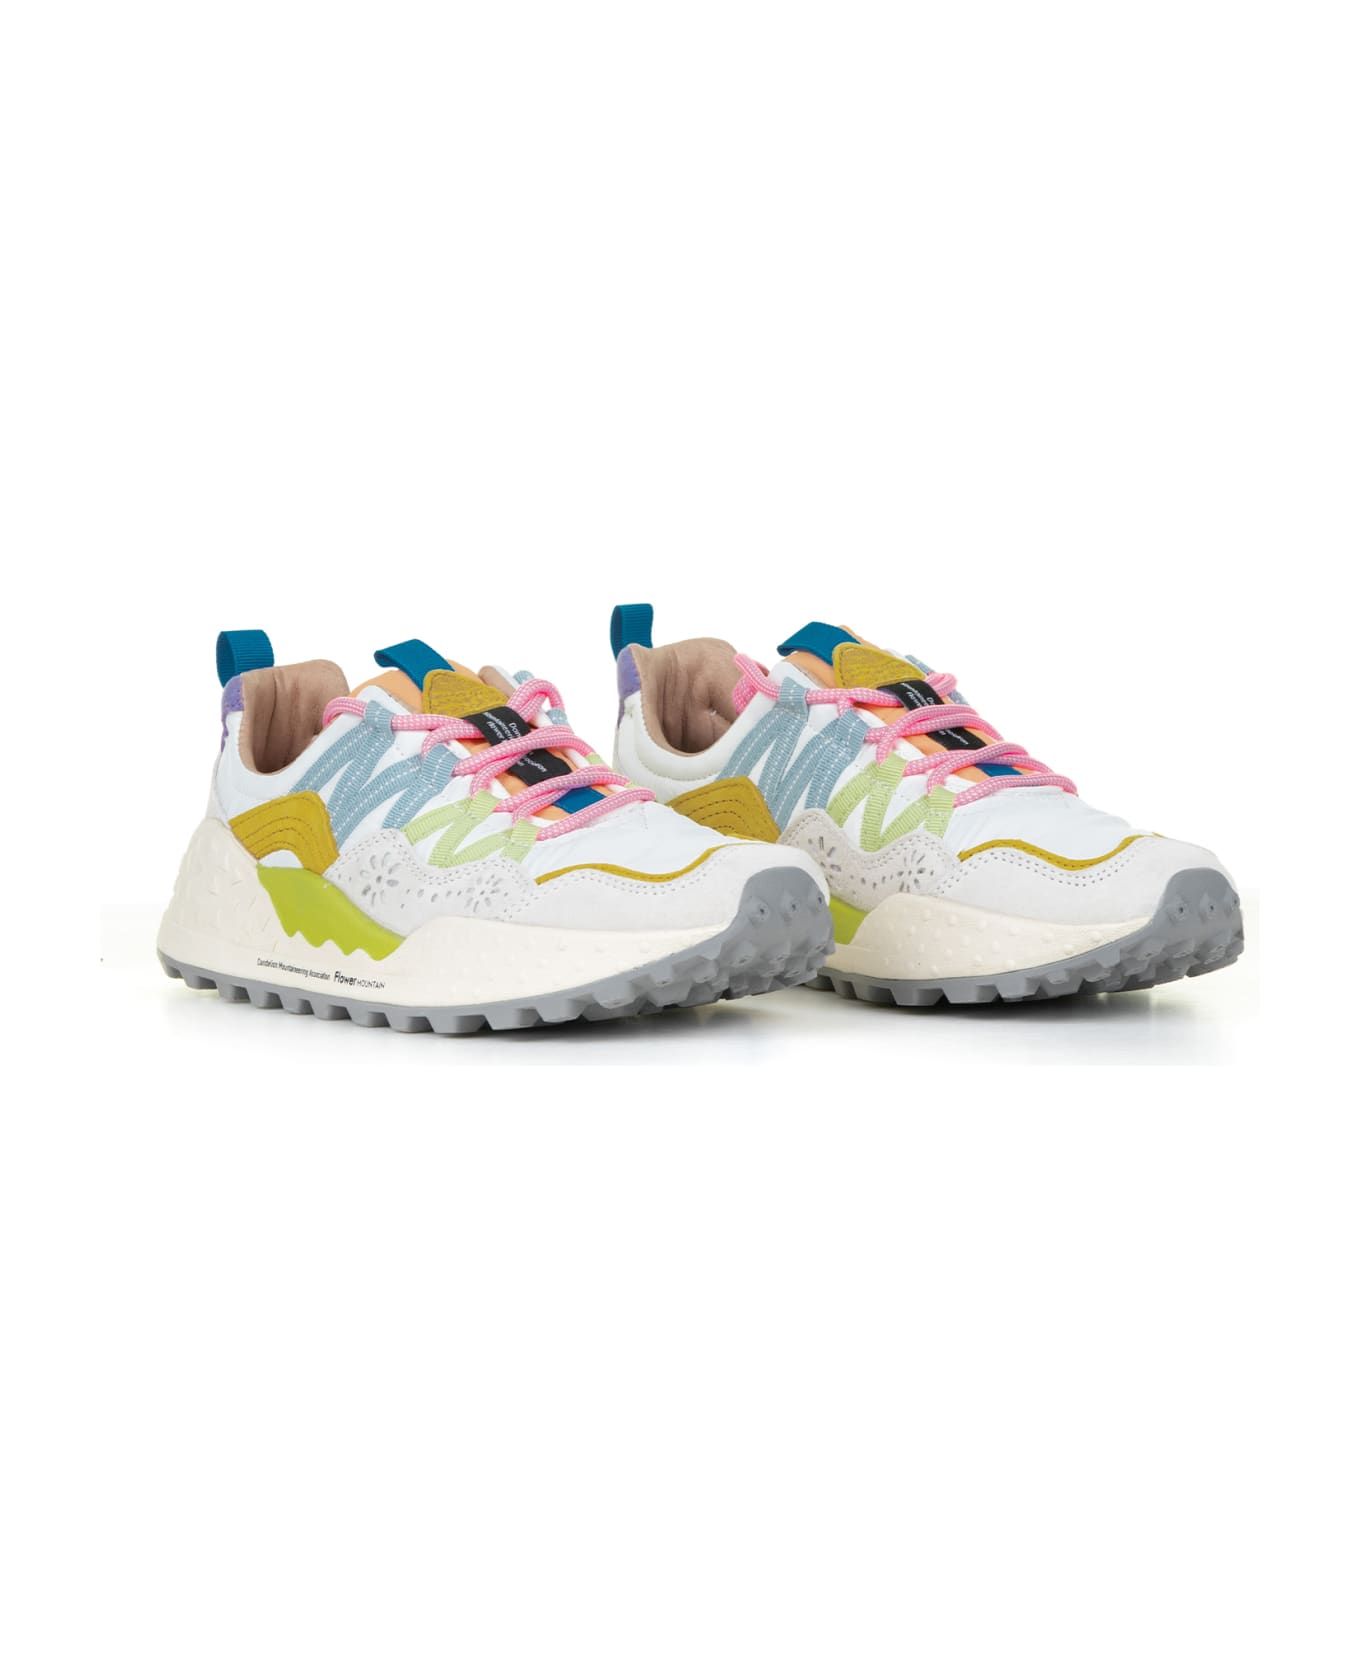 Flower Mountain Multicolored Washi Sneakers In Suede And Nylon - BEIGE WHITE MULTI